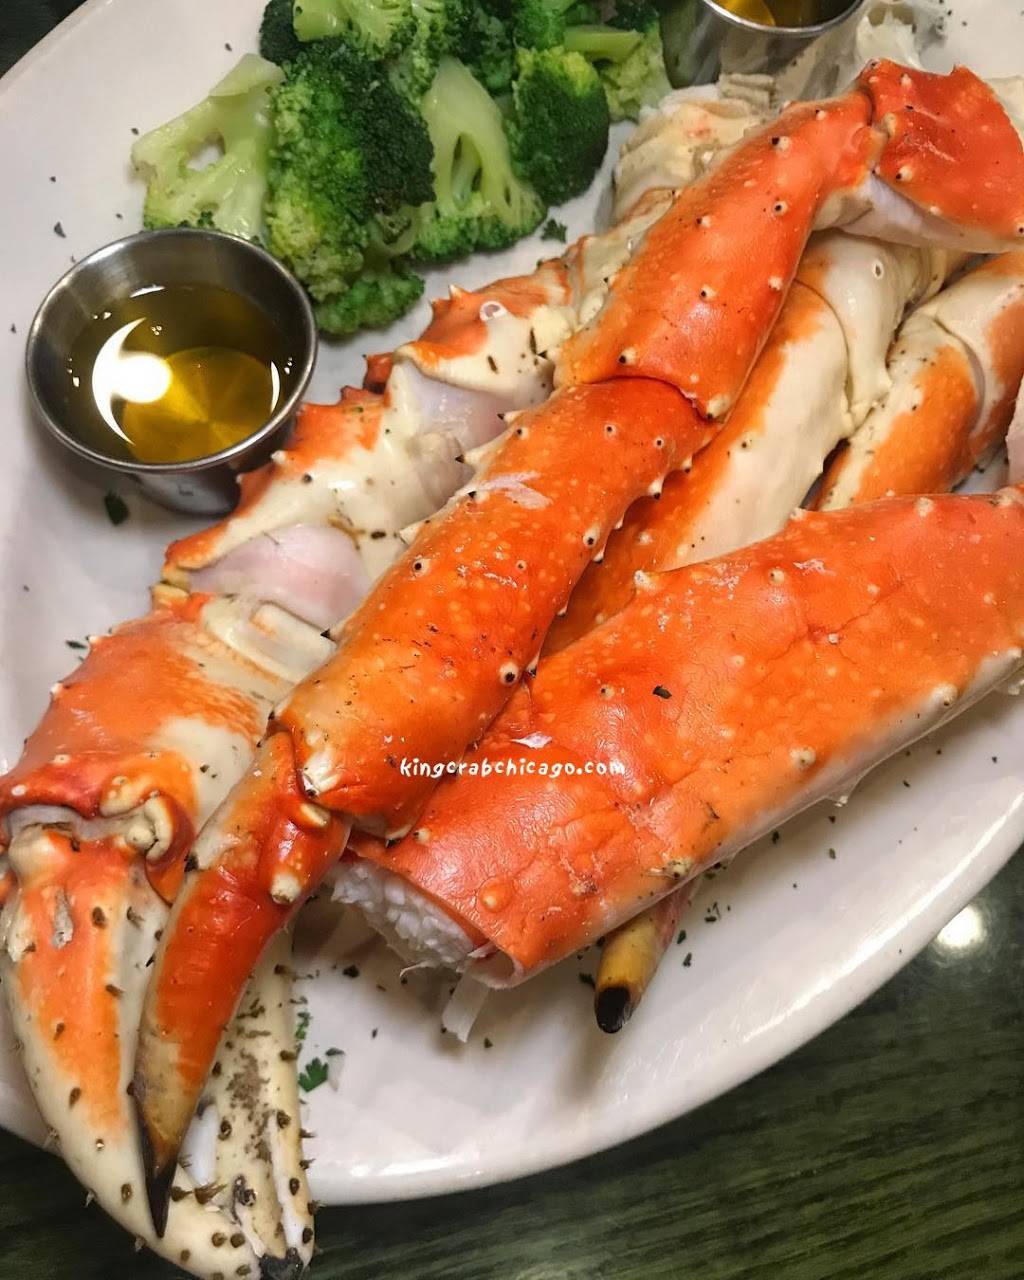 King Crab House Chicago | restaurant | 1816 N Halsted St, Chicago, IL 60614, USA | 3122808990 OR +1 312-280-8990